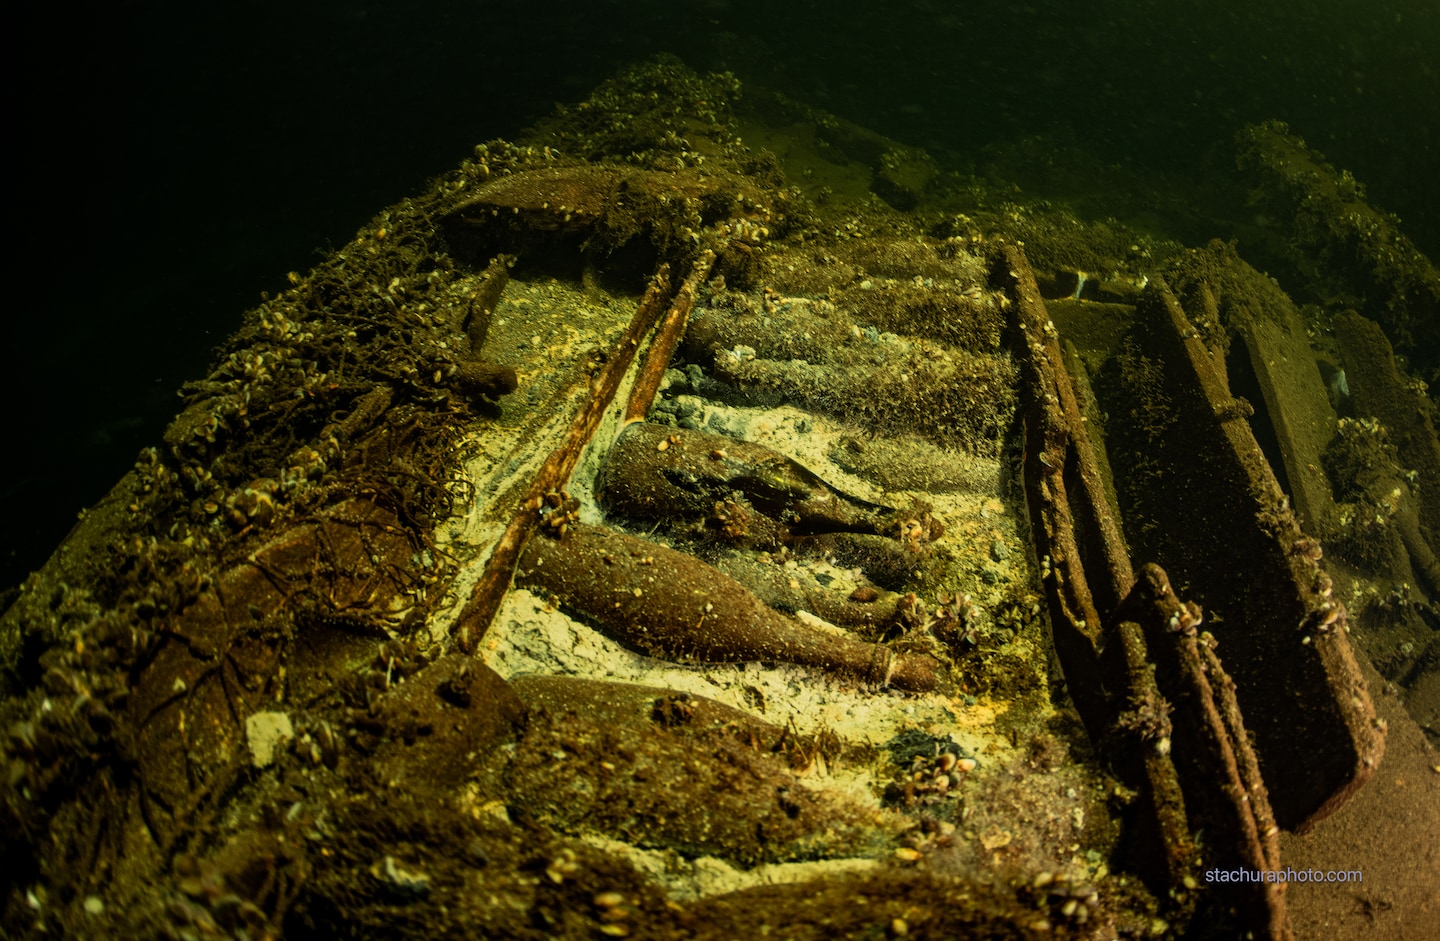 Baltic Sea divers discover shipwreck with 100 bottles of champagne